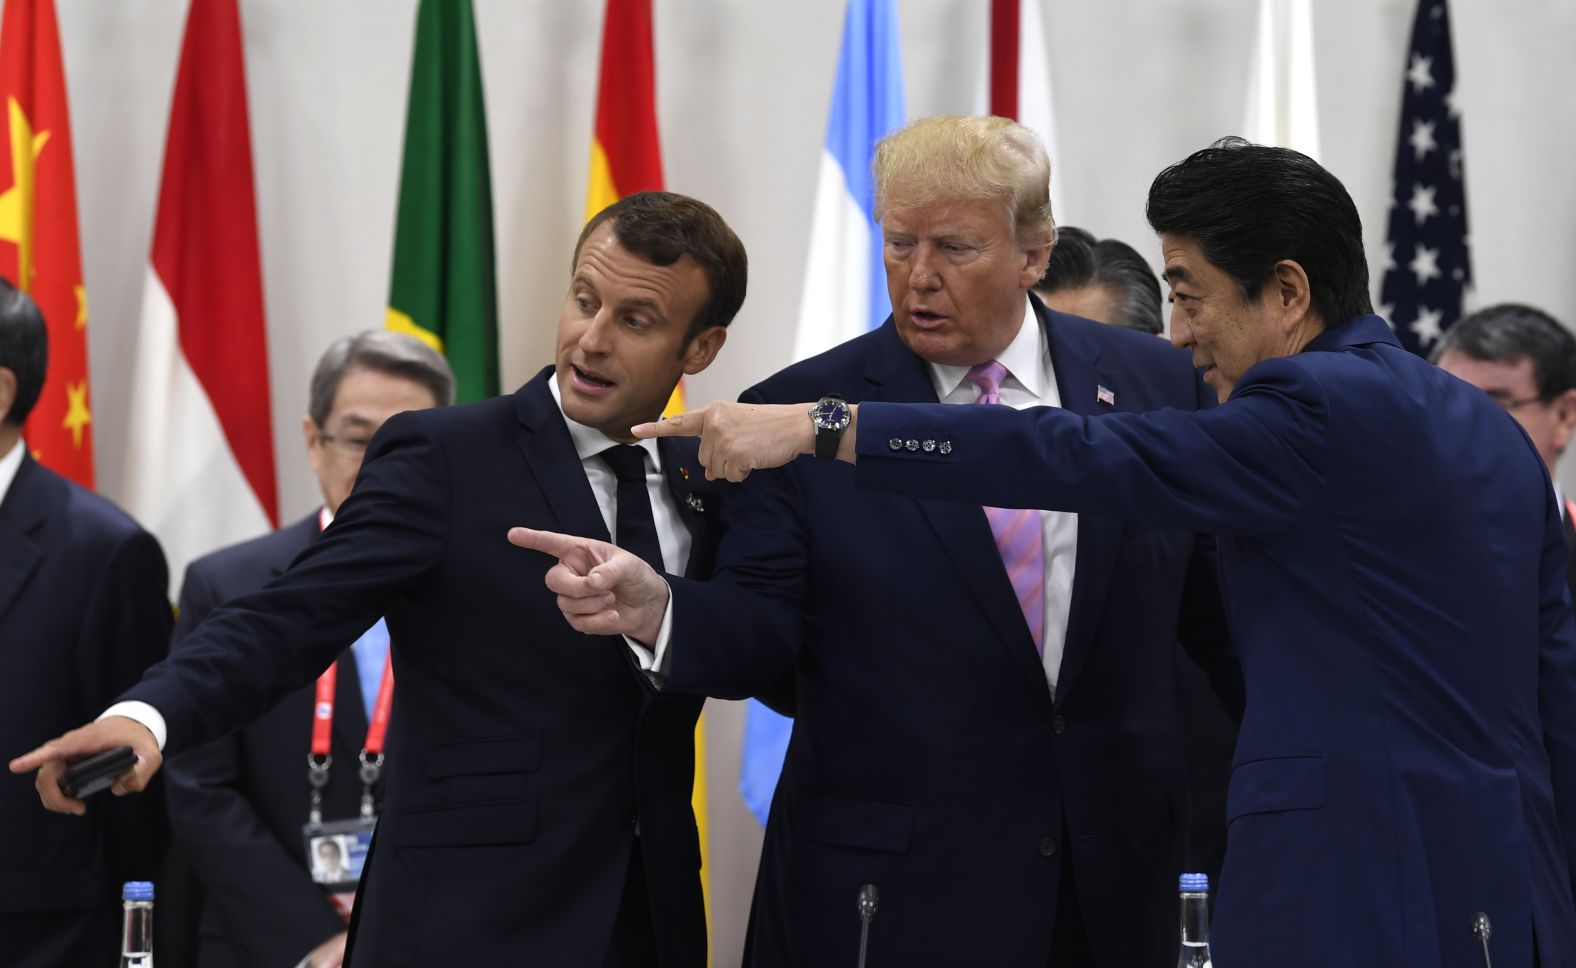 French President Emmanuel Macron, President Donald Trump and Japanese Prime Minister Shinzo Abe speak before a working session at the G20 summit on Friday, June 28. 